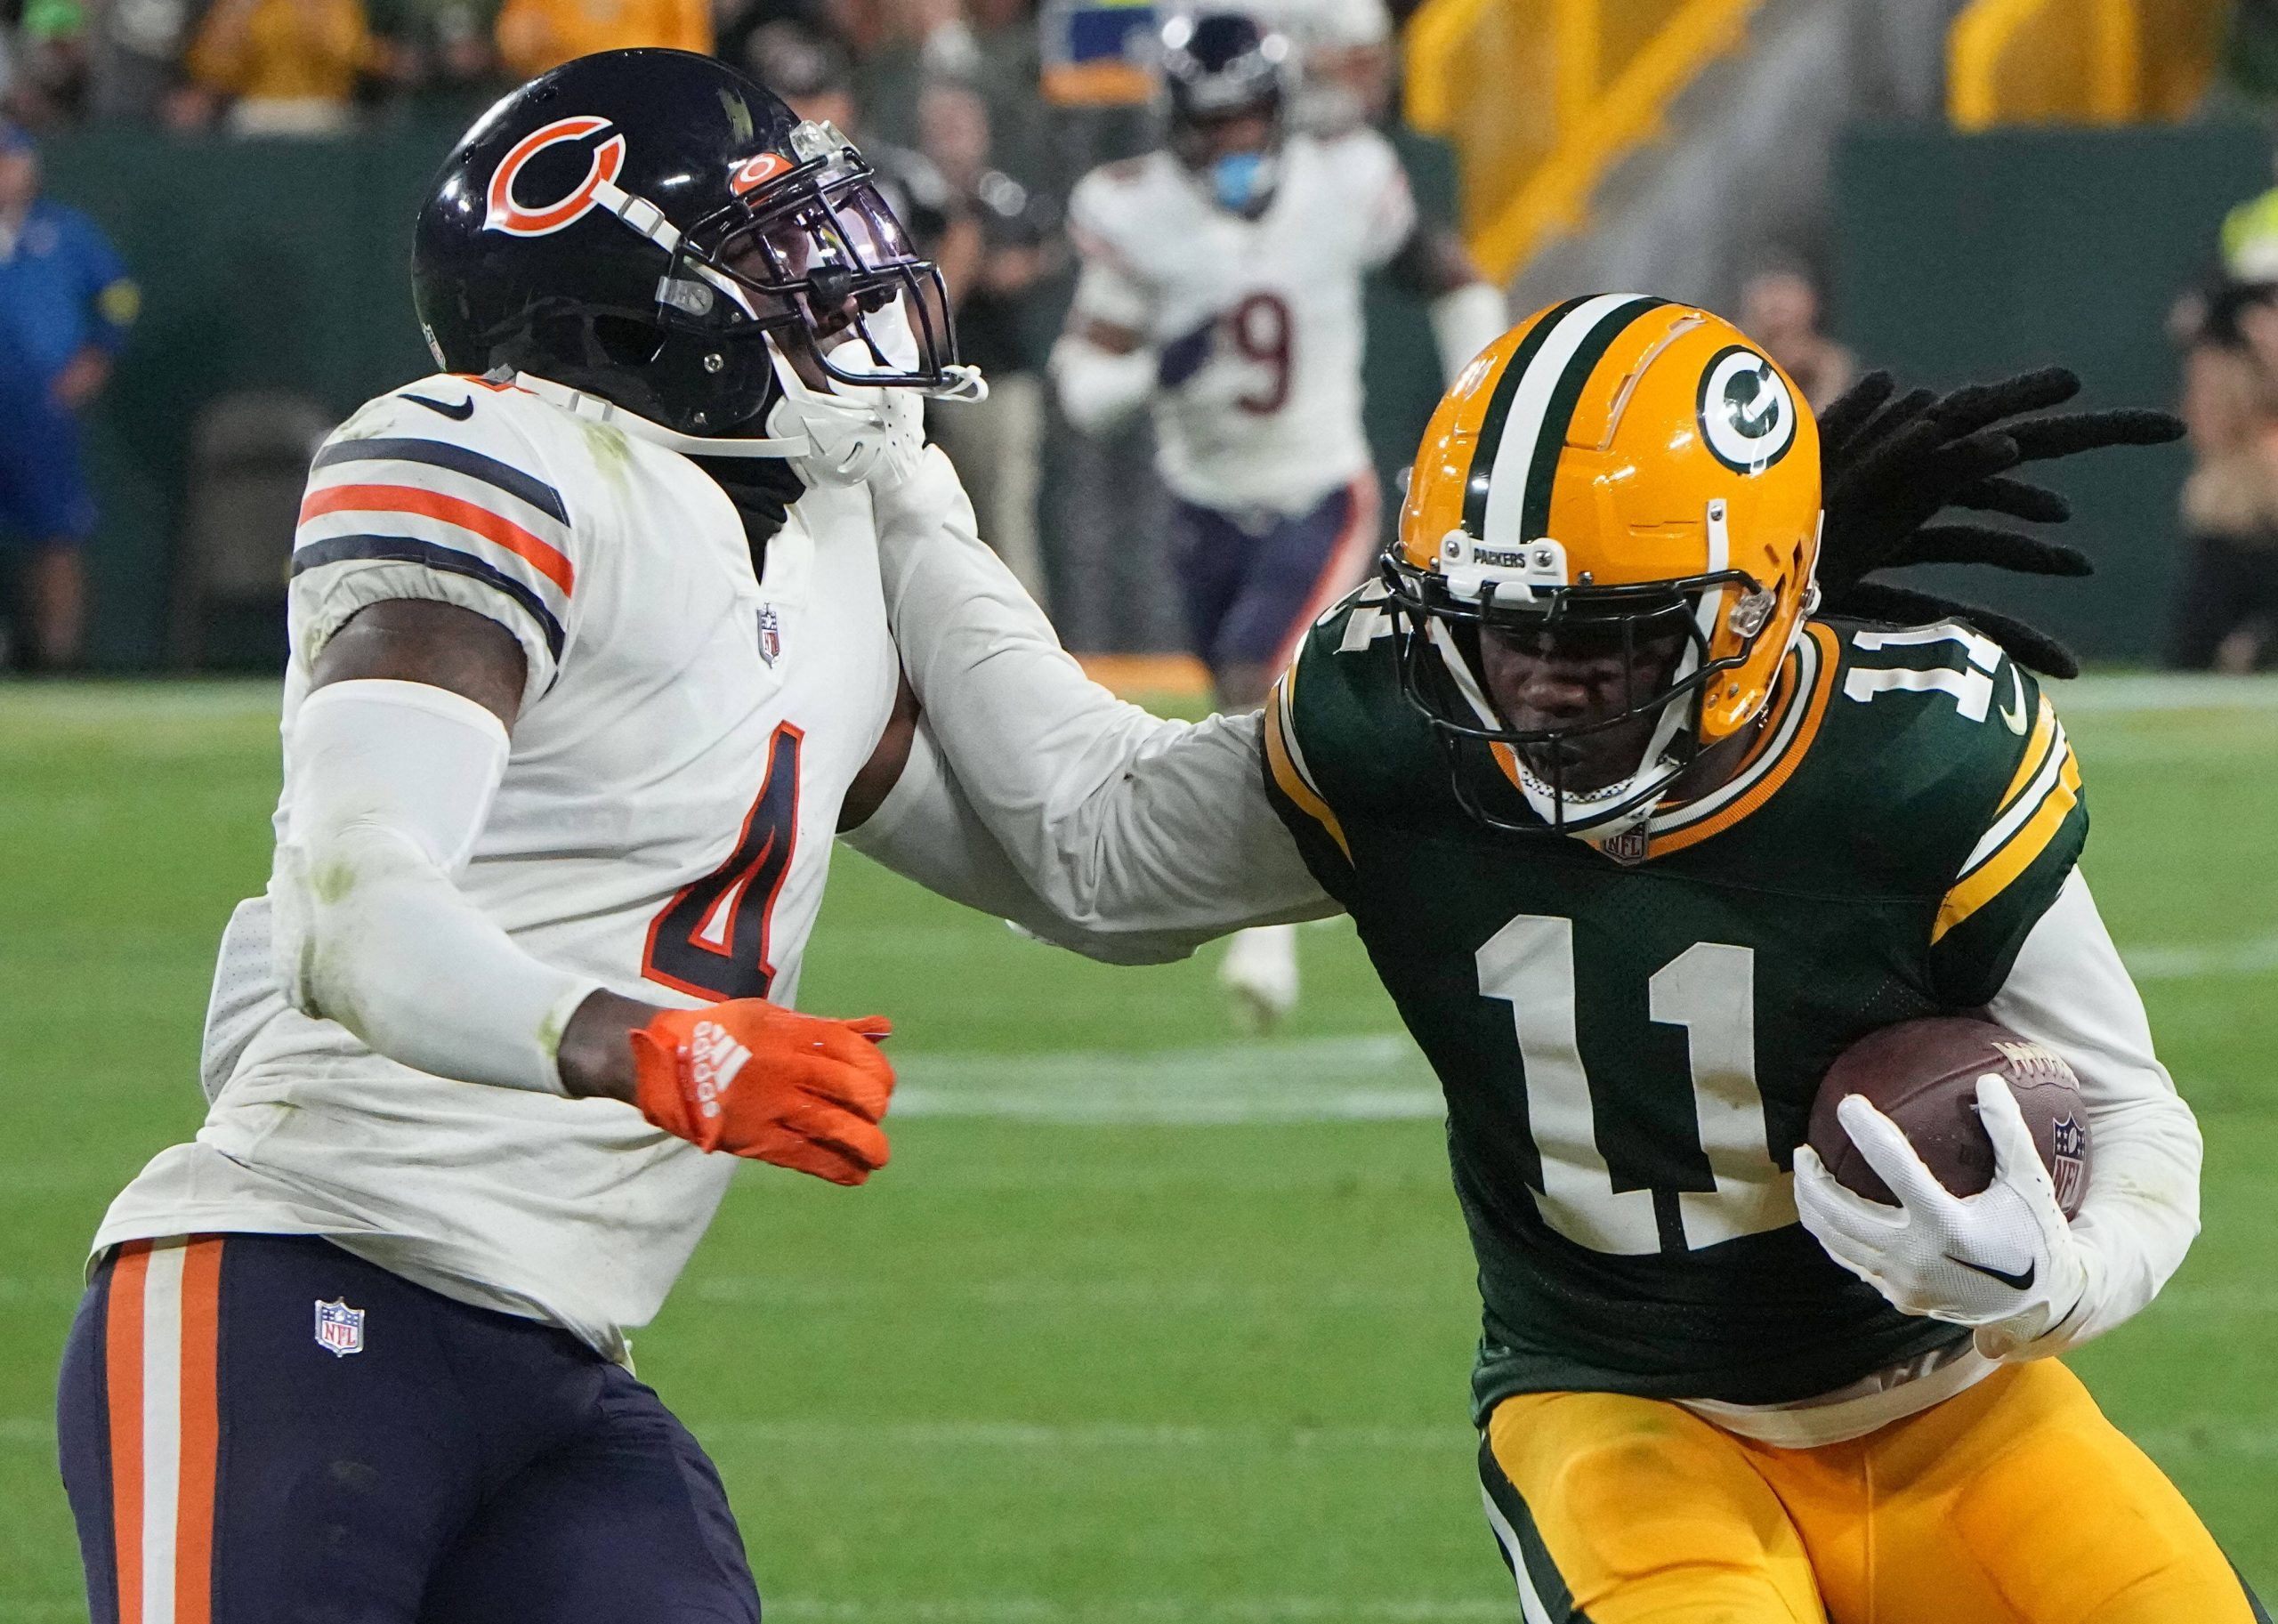 NFL, American Football Herren, USA Chicago Bears at Green Bay Packers Sep 18, 2022 Green Bay, Wisconsin, USA Green Bay Packers wide receiver Sammy Watkins 11 stiff arms Chicago Bears safety Eddie Jackson 4 while picking up 14 yards on a reception during the fourth quarter of their game at Lambeau Field. Green Bay Lambeau Field Wisconsin USA, EDITORIAL USE ONLY PUBLICATIONxINxGERxSUIxAUTxONLY Copyright: xMarkxHoffmanx 20220918_JAB_mh_223